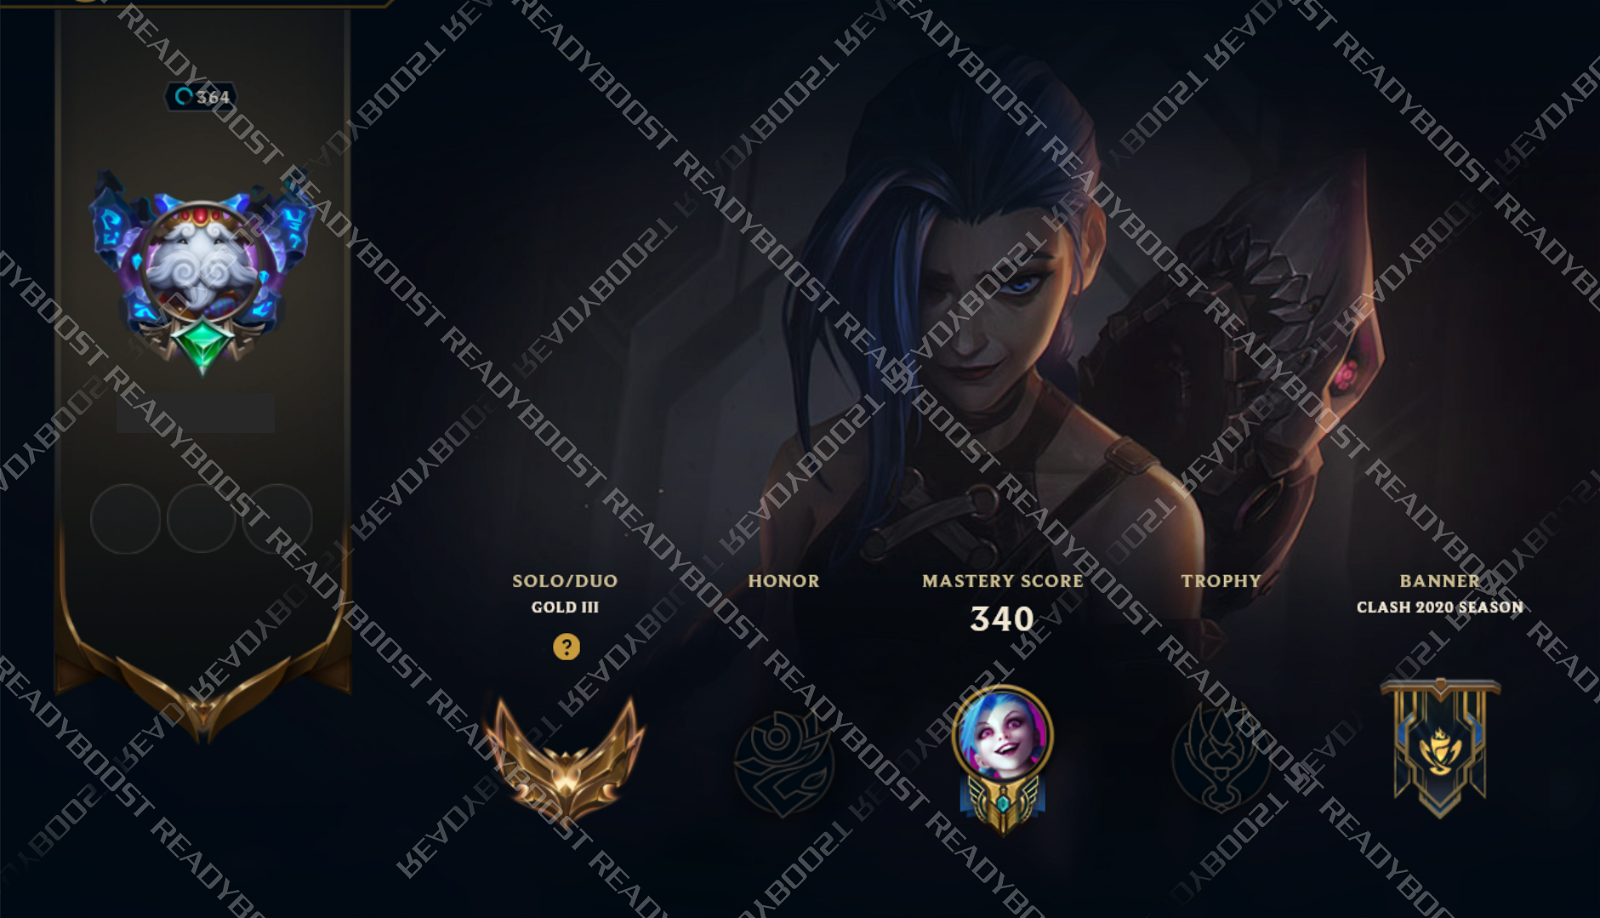 Selling - Lol & TFT Boost and Services, Cheap Prices